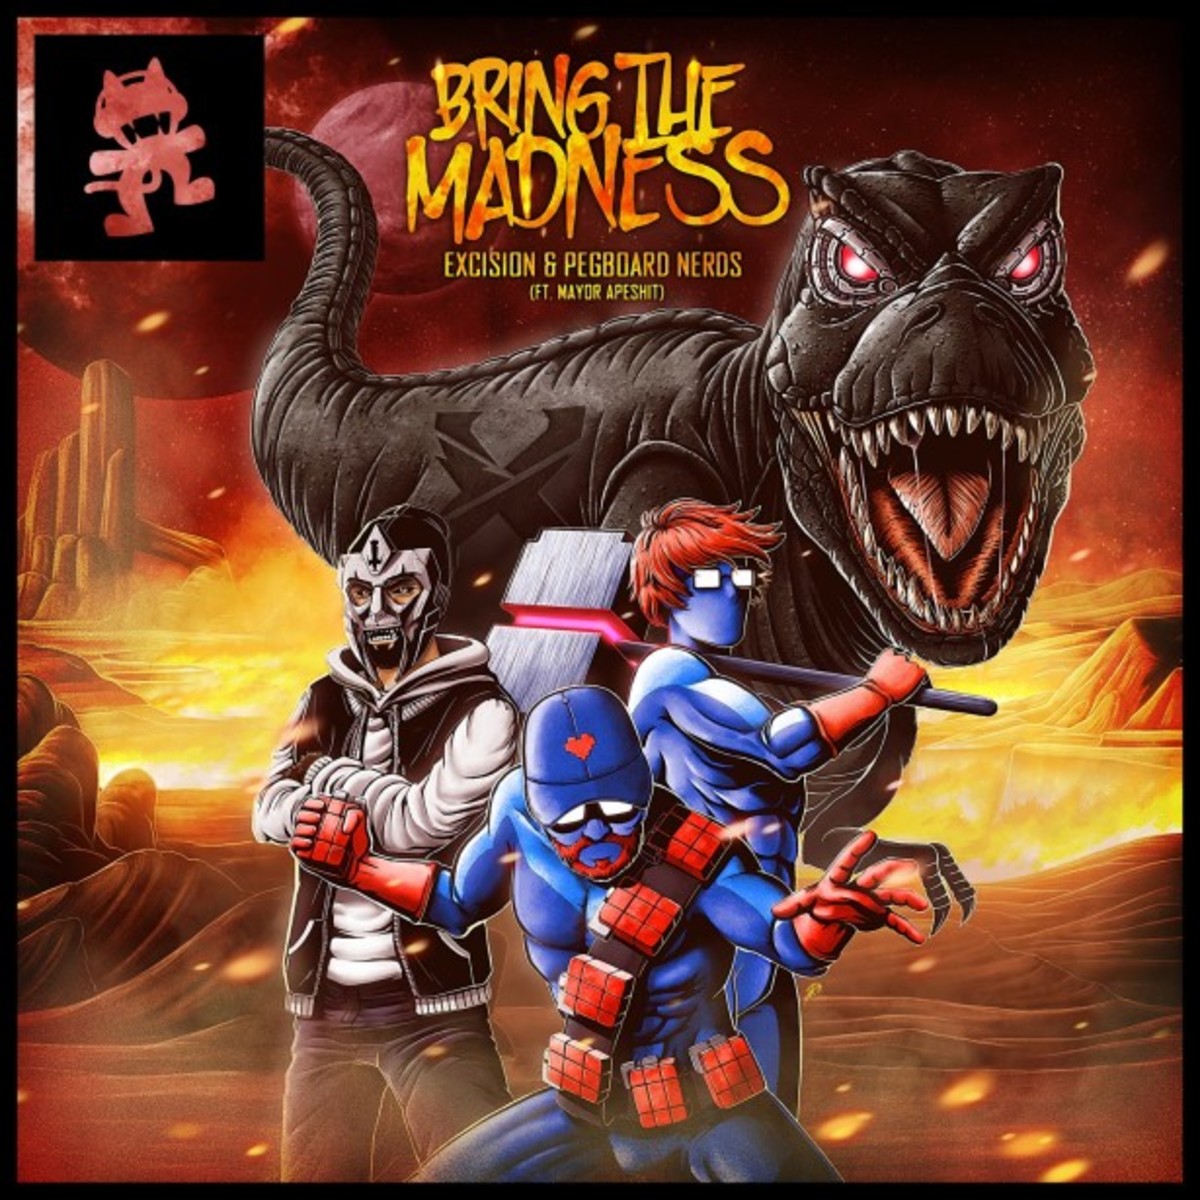 New Excision & Pegboard Nerds - Bring the Madness